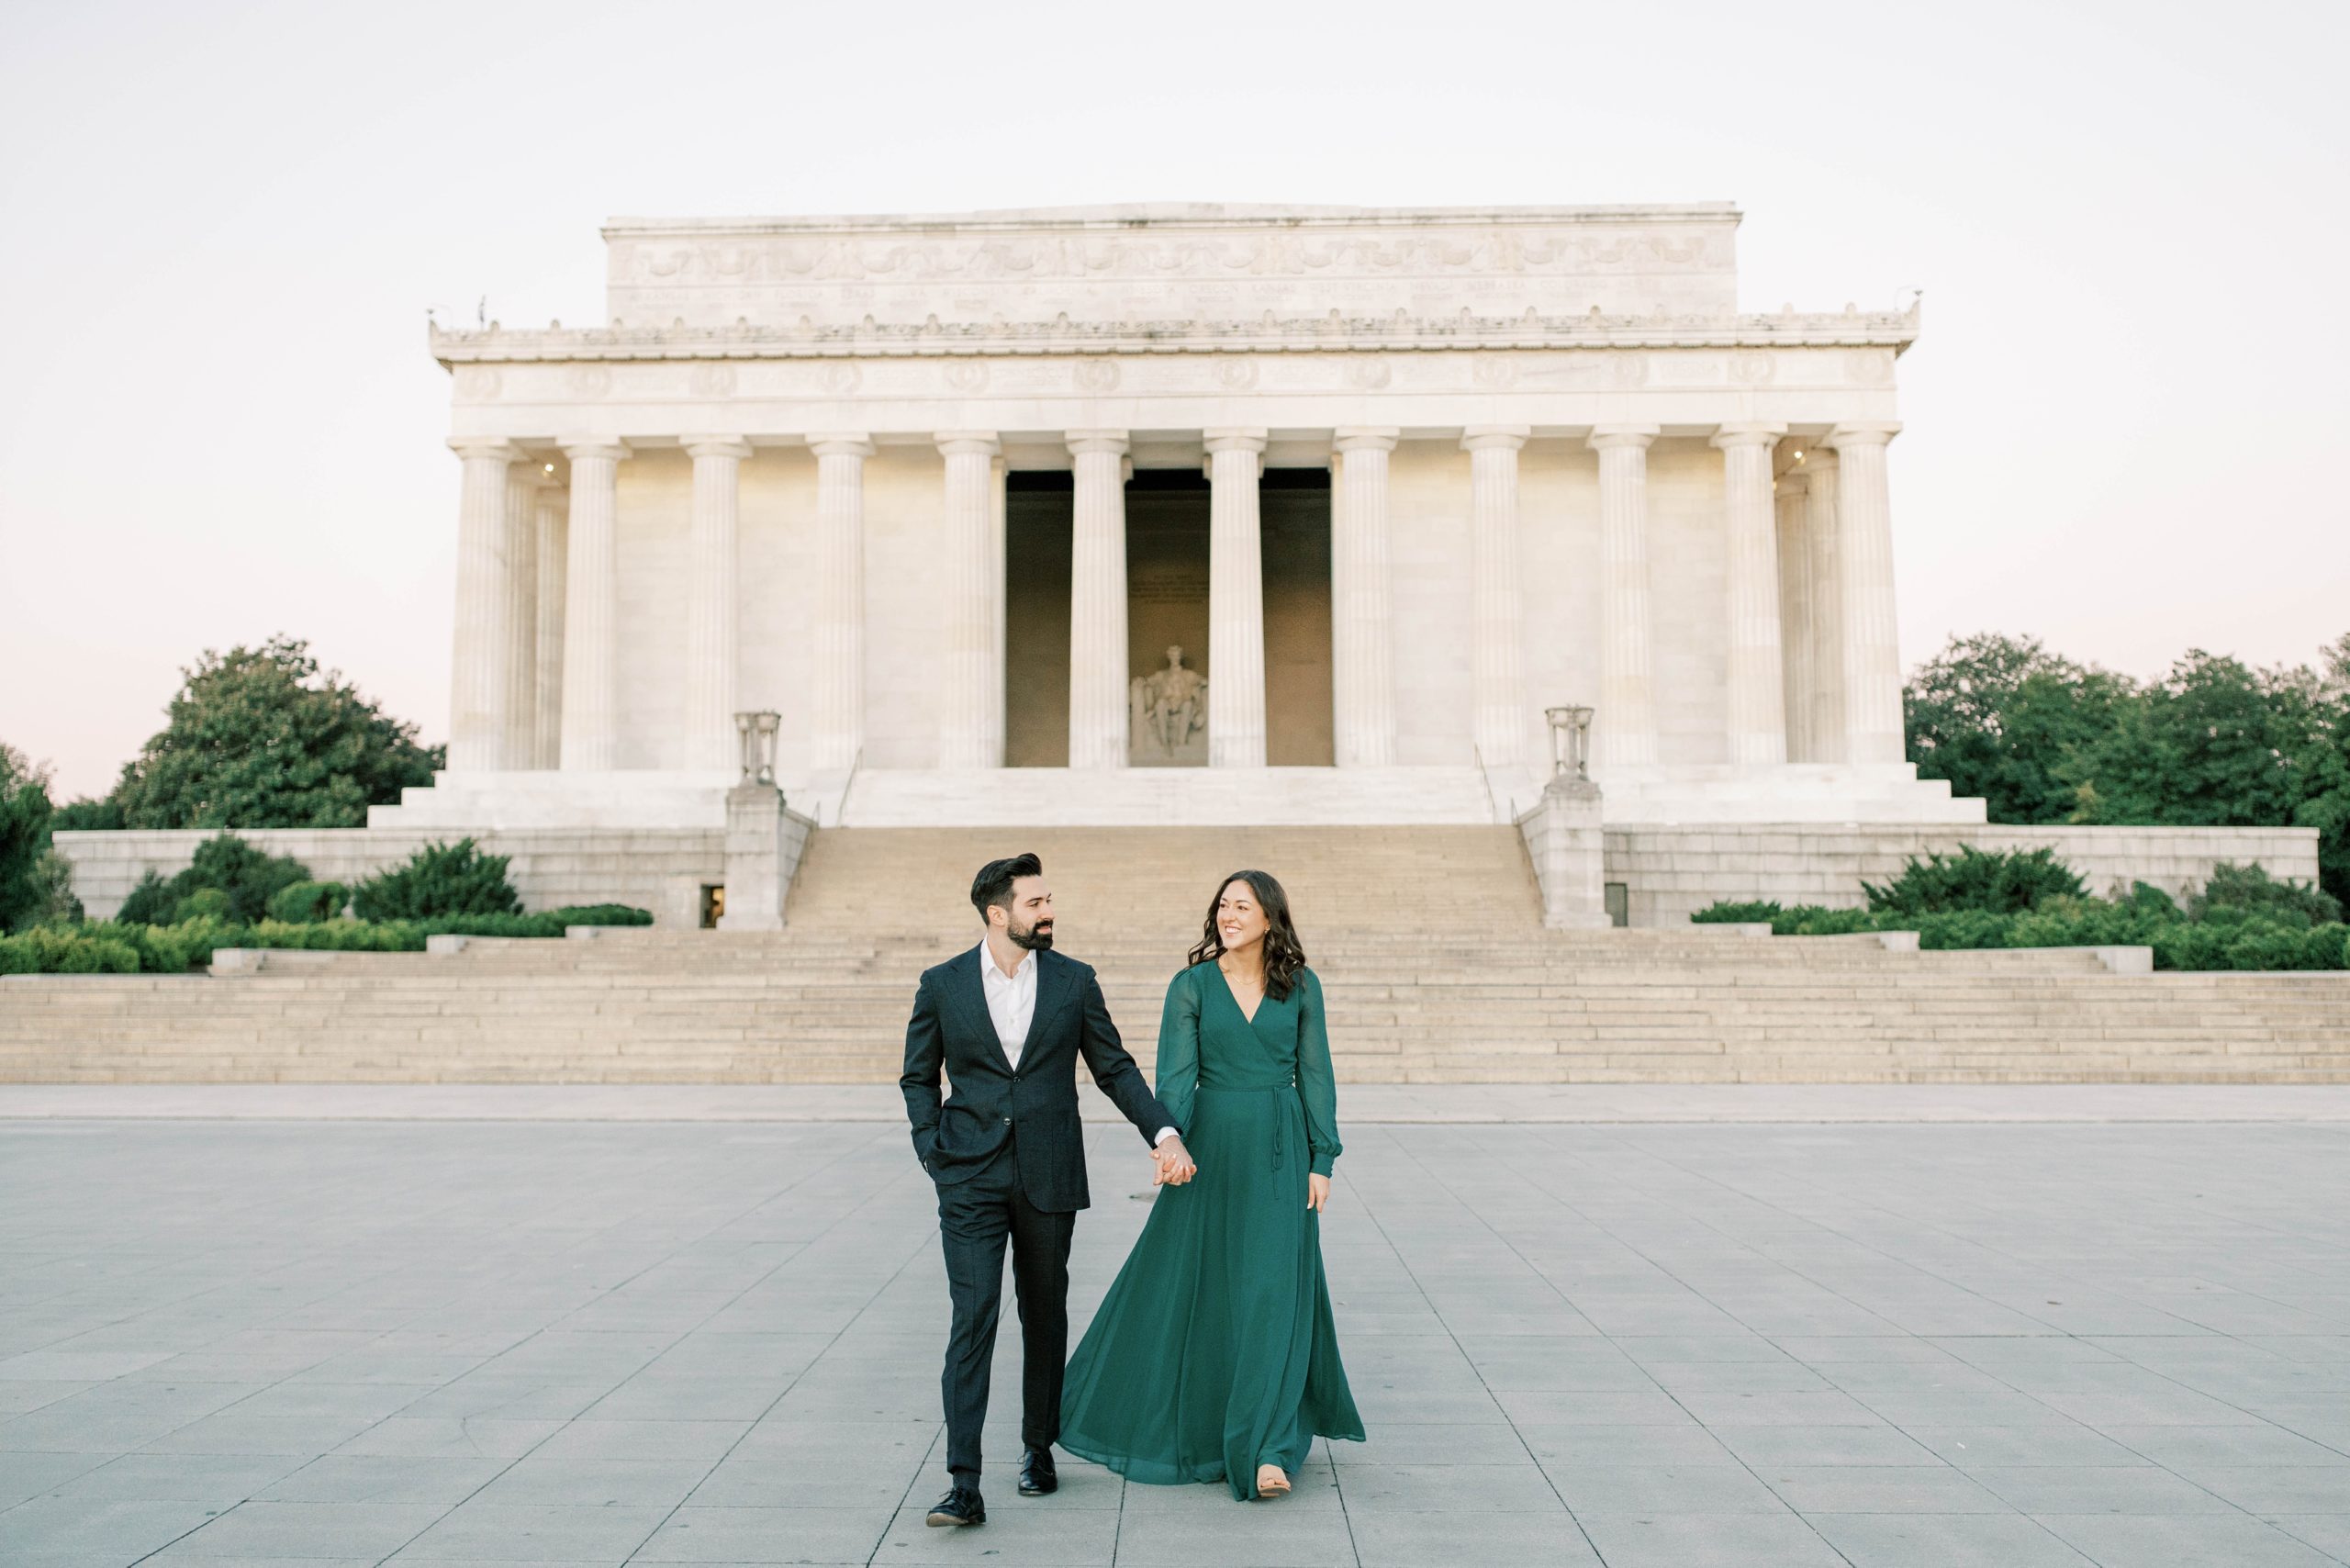 An elegant sunrise engagement session at the Reflecting Pool & Lincoln Memorial by Washington, DC wedding photographer, Alicia Lacey.